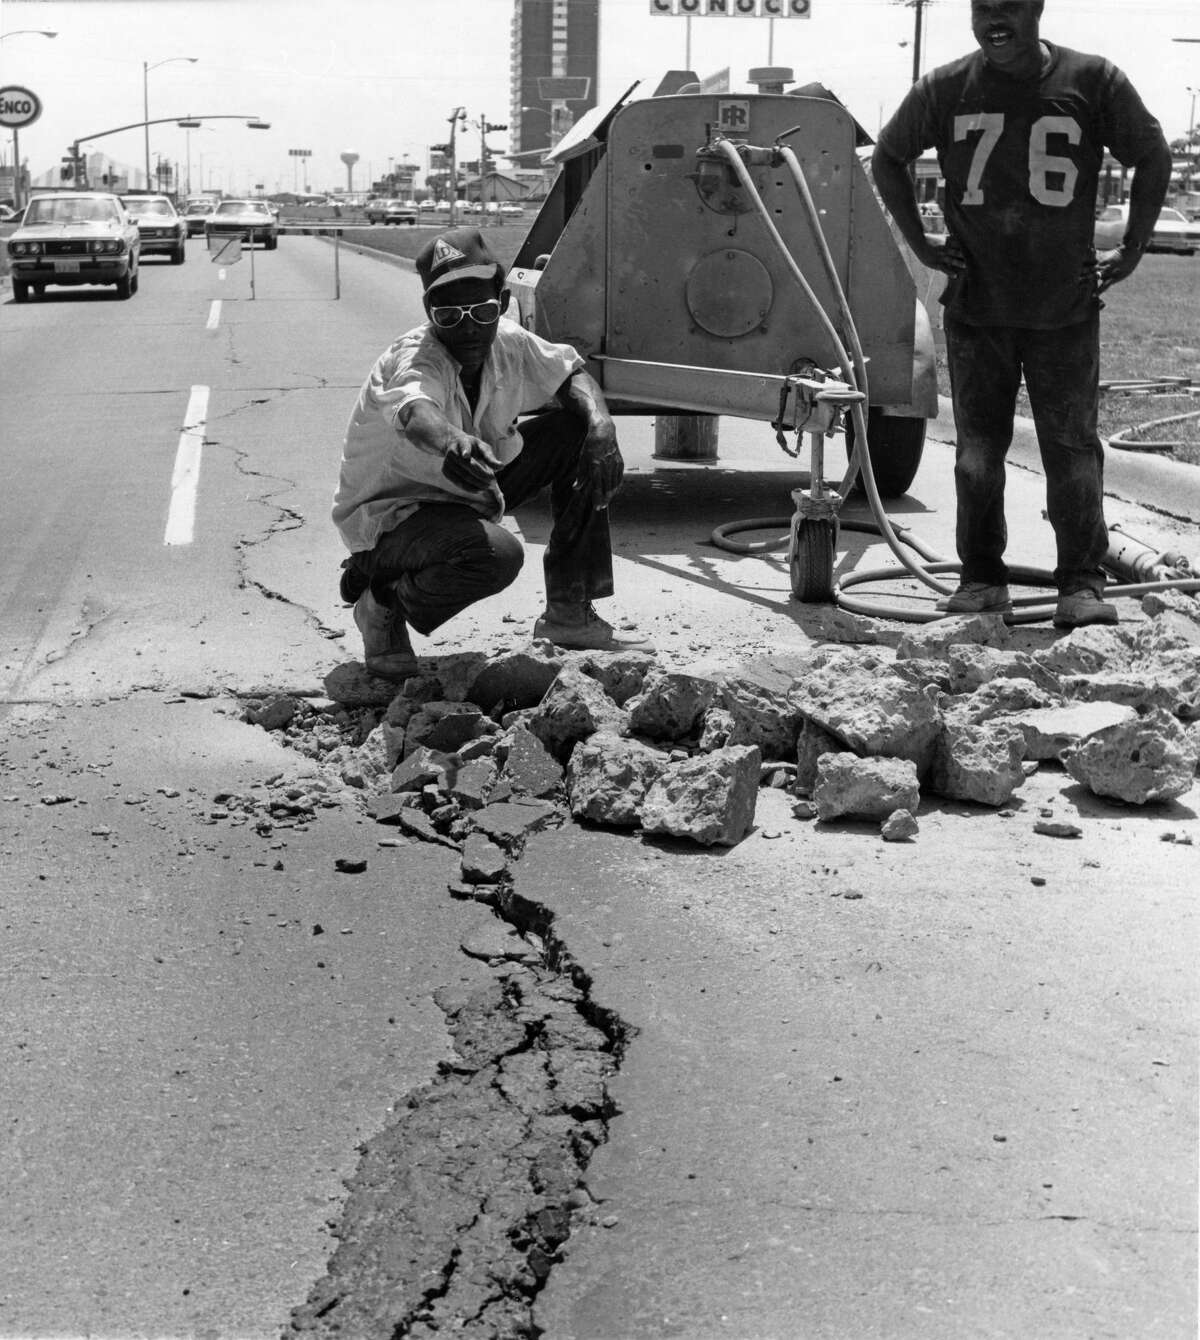 June 1972: This pavement, buckled by heat, is on Bellaire near Fondren. John C. Jones, a hammer operator for the City of Houston, and a crew of workers were on the job repairing it. A spokesman for the City Public Works Department, said widespread buckling by heat usually occurs toward the end of the summer.